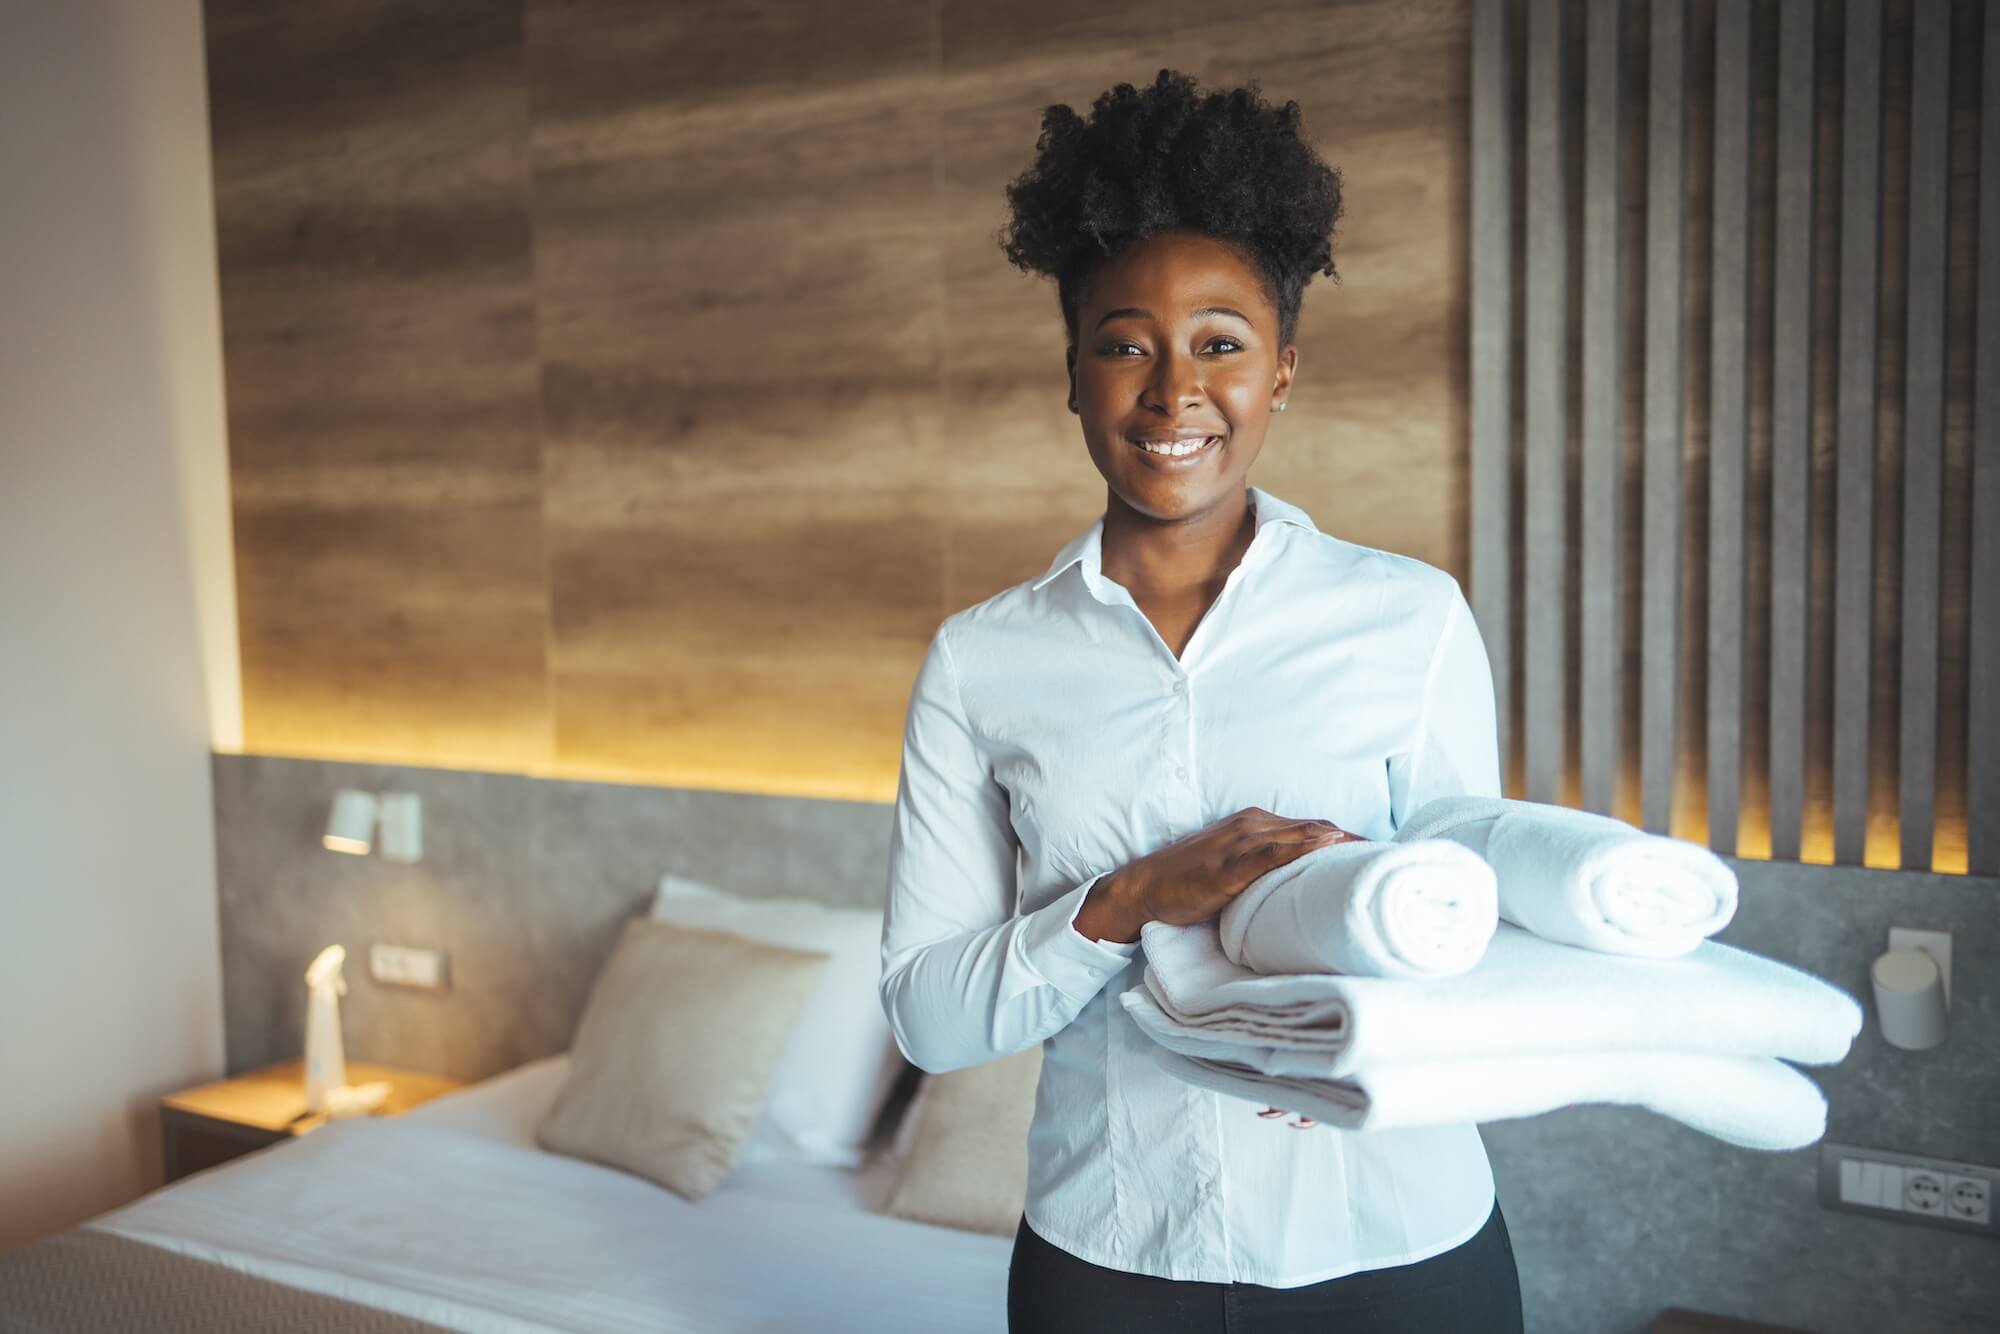 Orlando FL Housekeeping services, hire a housekeeper in Orlando FL, housekeeping jobs orlando 